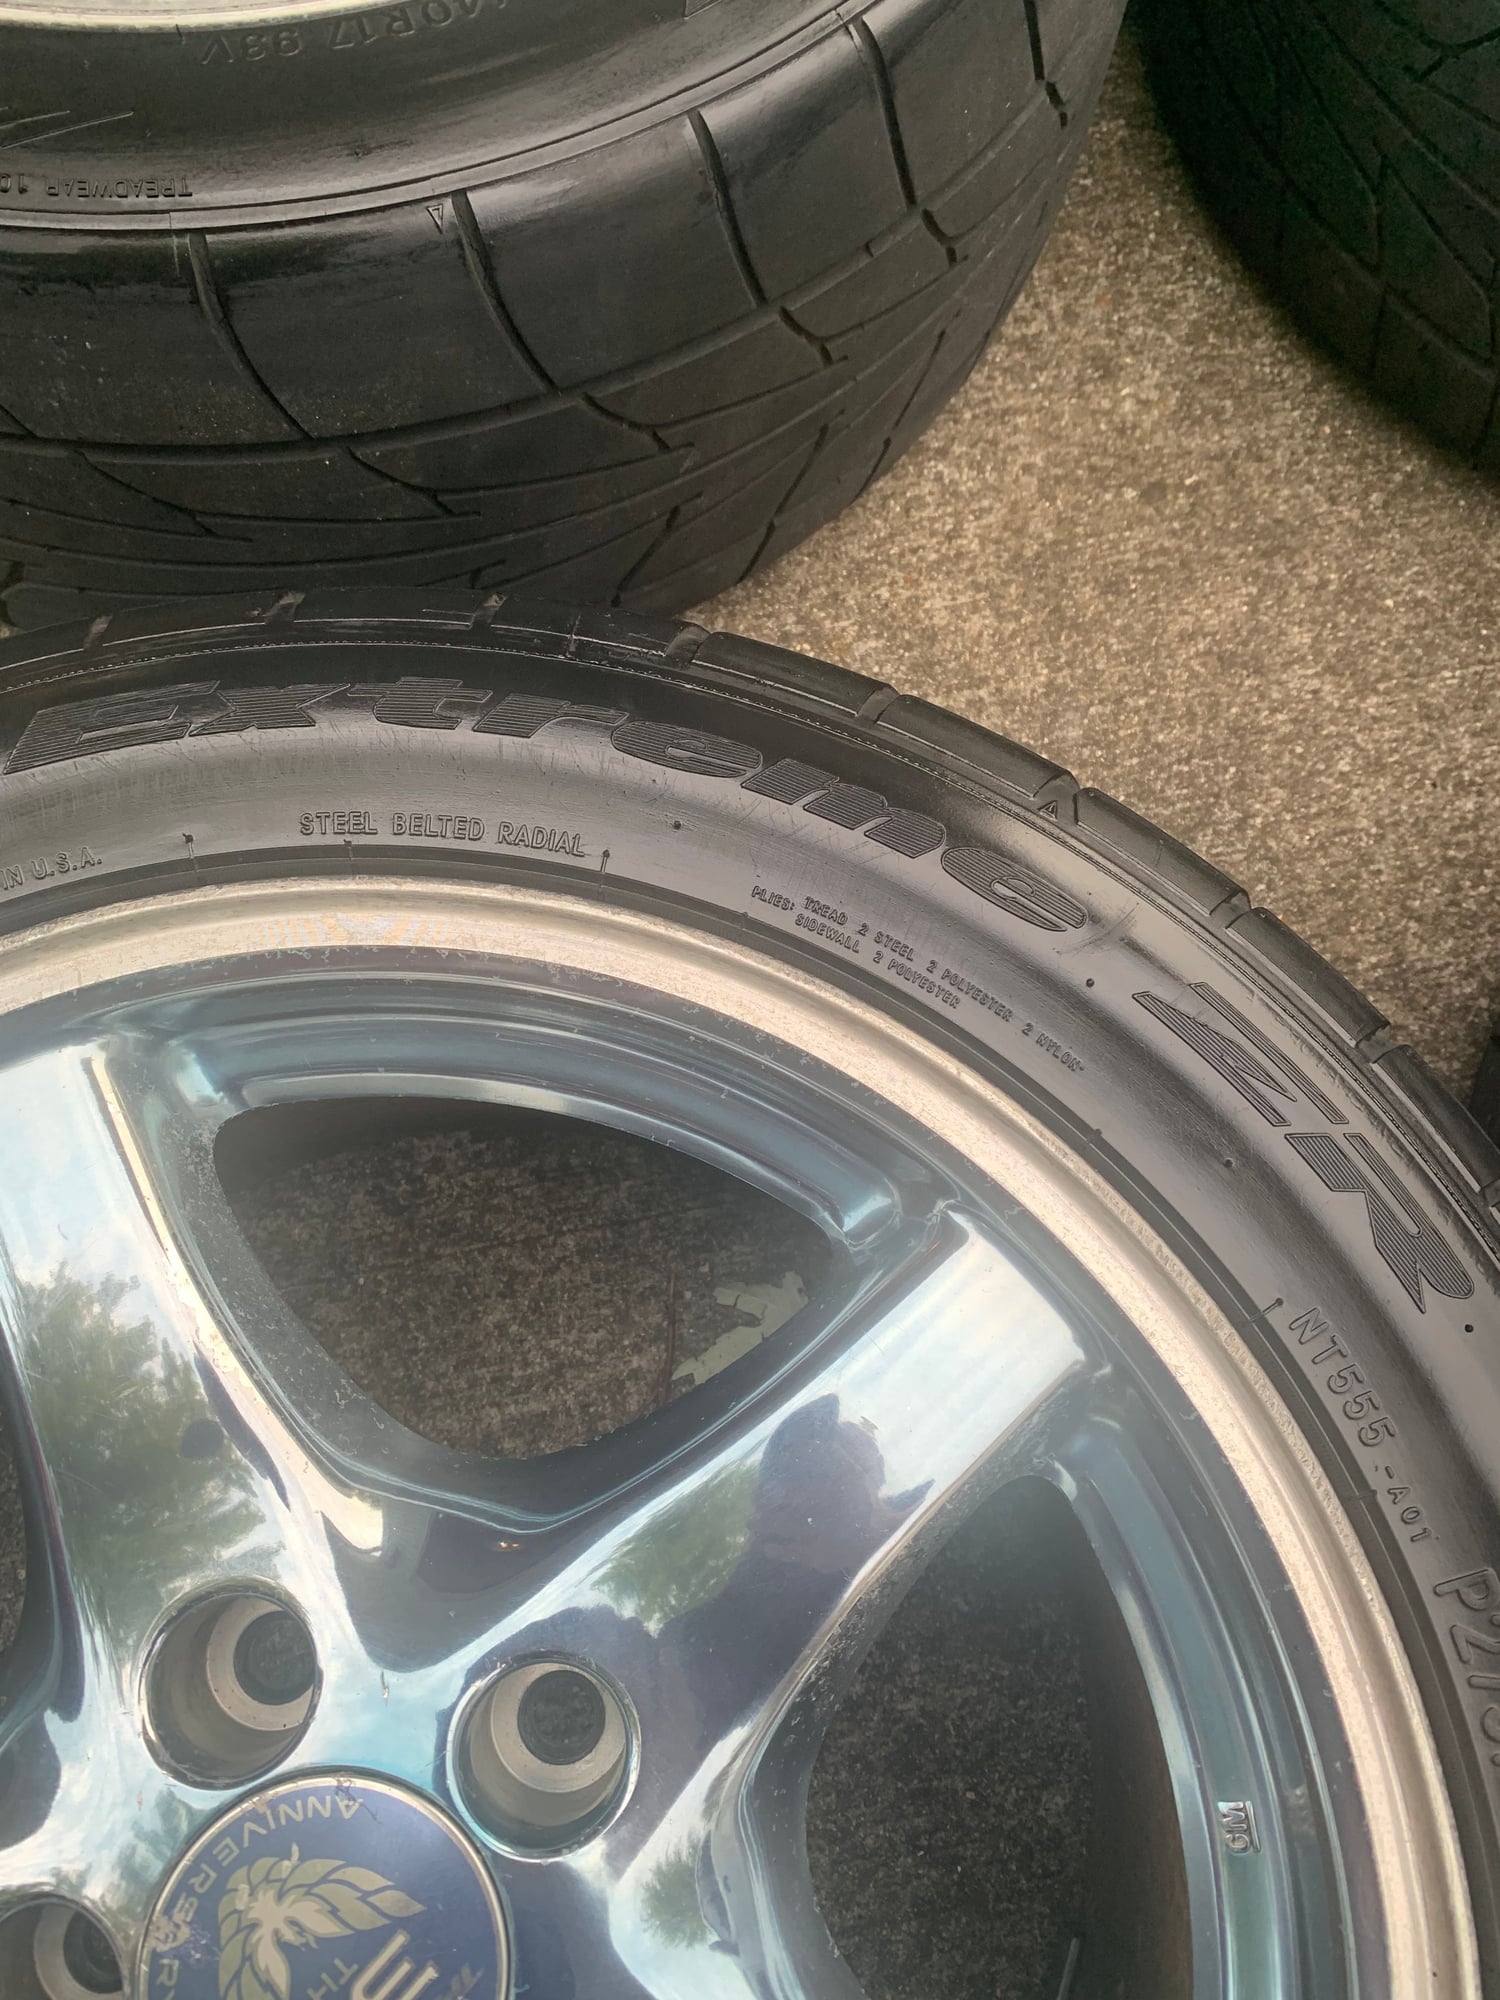 Wheels and Tires/Axles - Ws6 wheels - Used - 0  All Models - Lebanon, OH 45036, United States